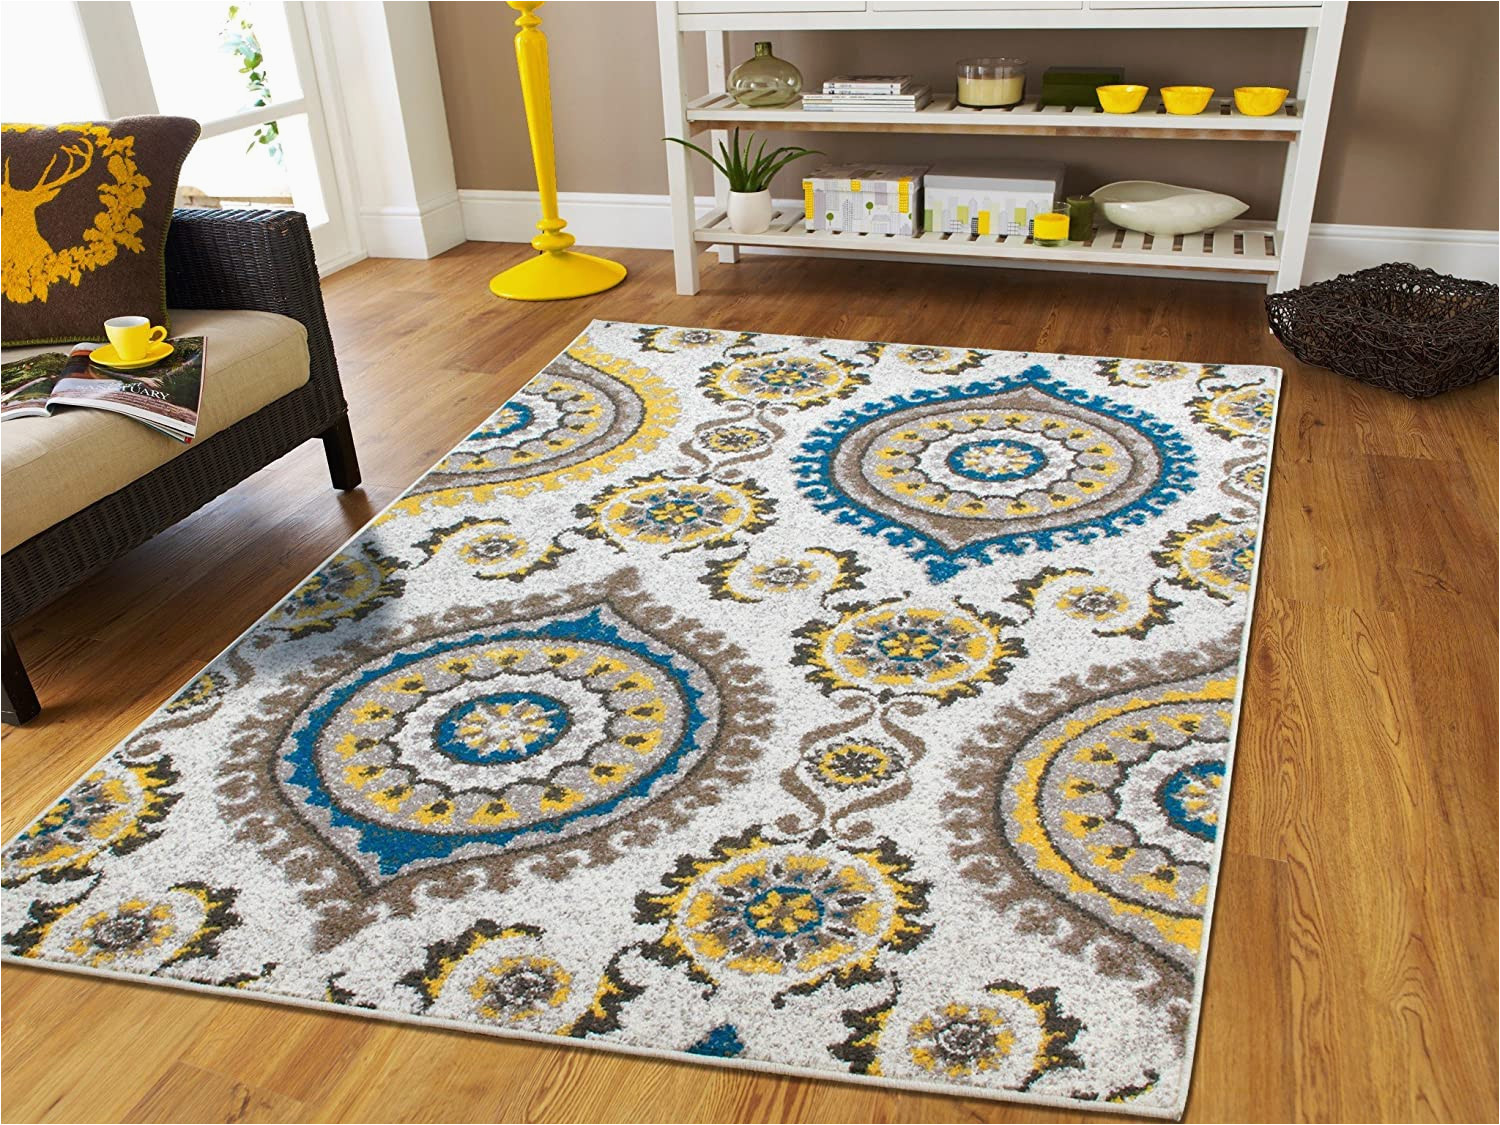 Yellow Turquoise and Gray area Rugs Contemporary Rugs for Living Room area Rugs Modern Flowers 2×3 Rugs for Bedroom for Teens 2×4 Blue Cream Grey Door Mats Outside Entrance Rug Washable, …